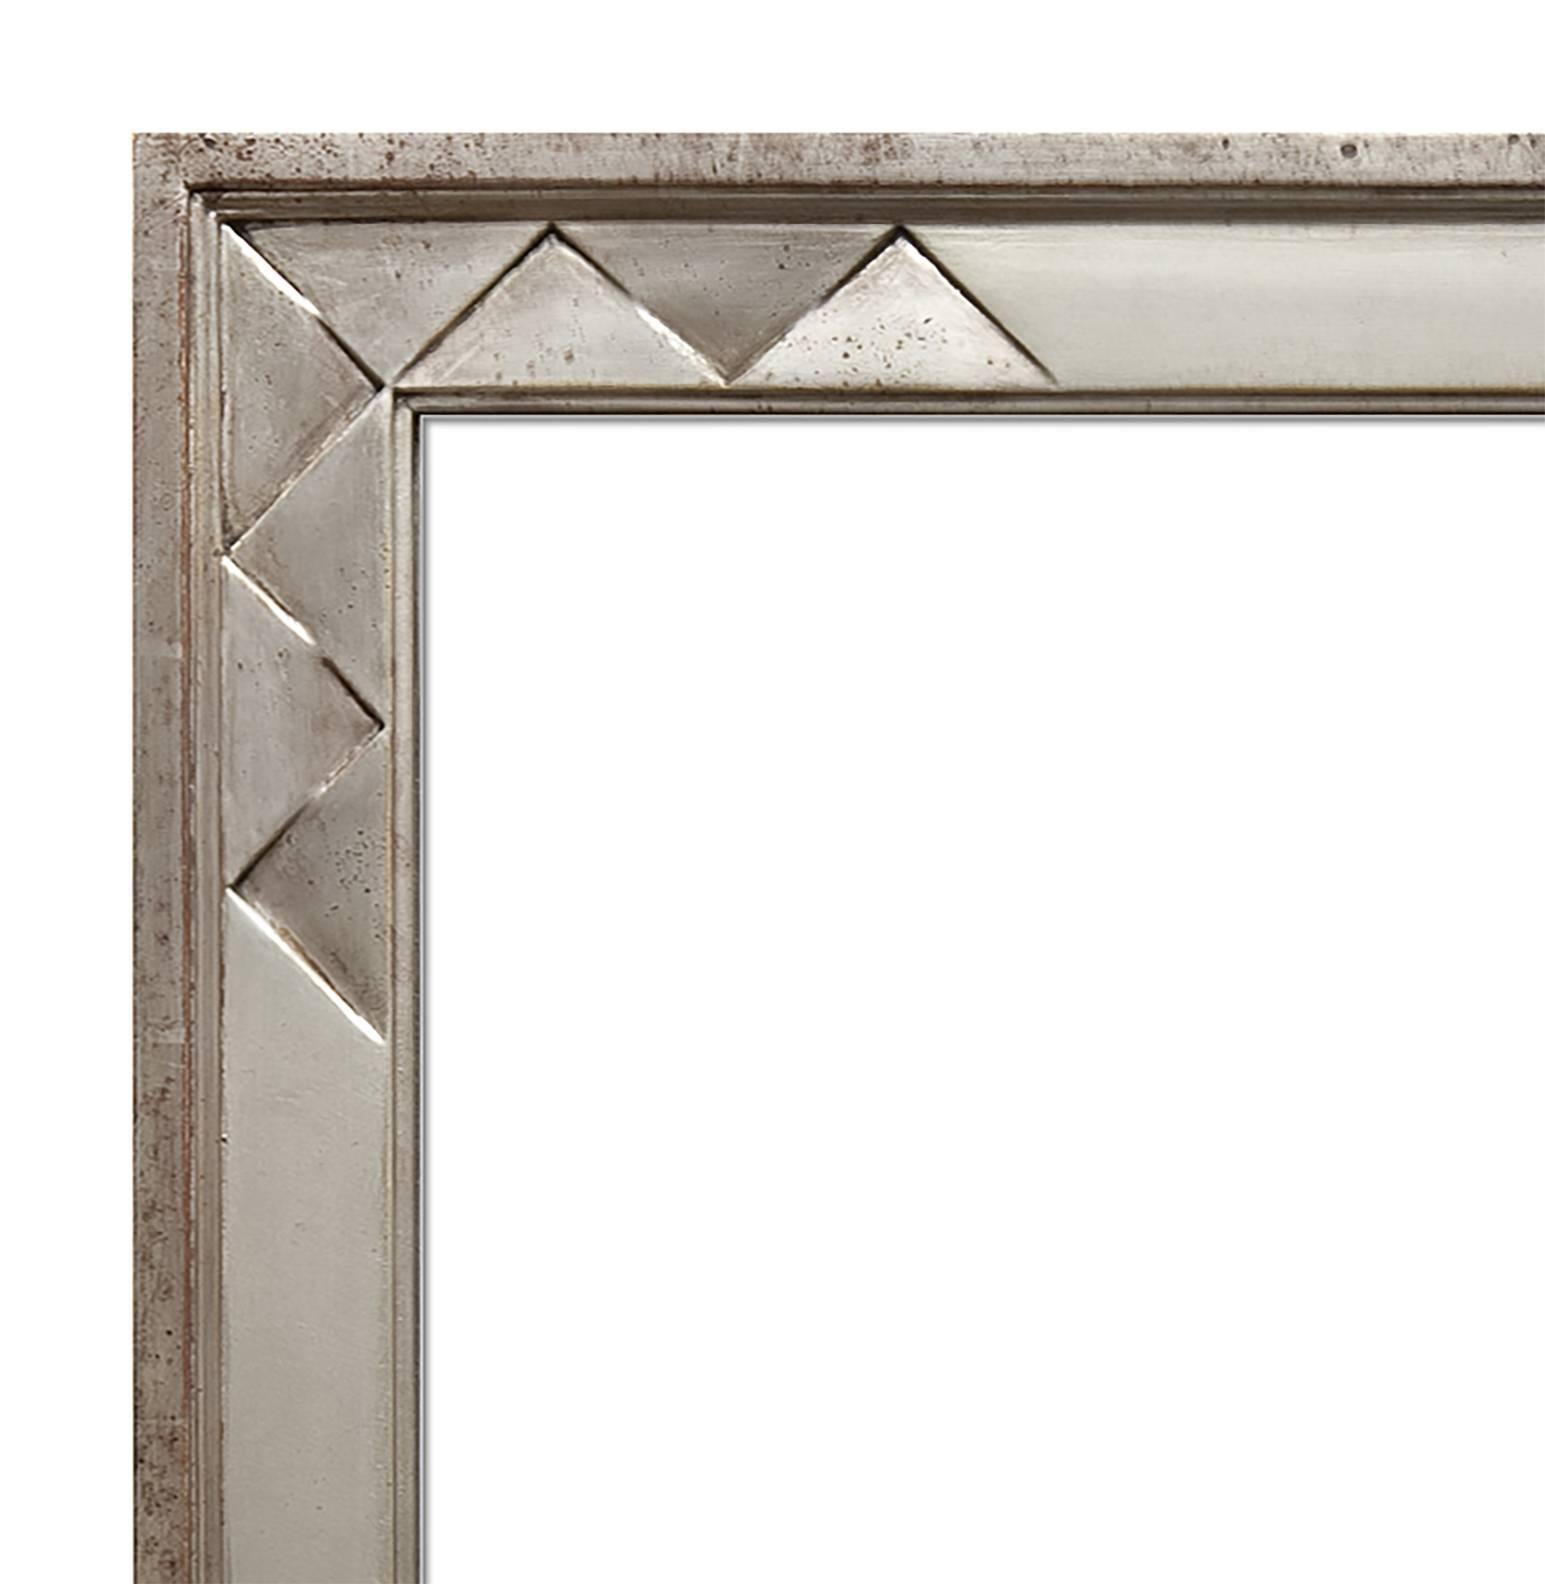 Contemporary carved wood white gold mirror frame with pyramid ornament corners. 28